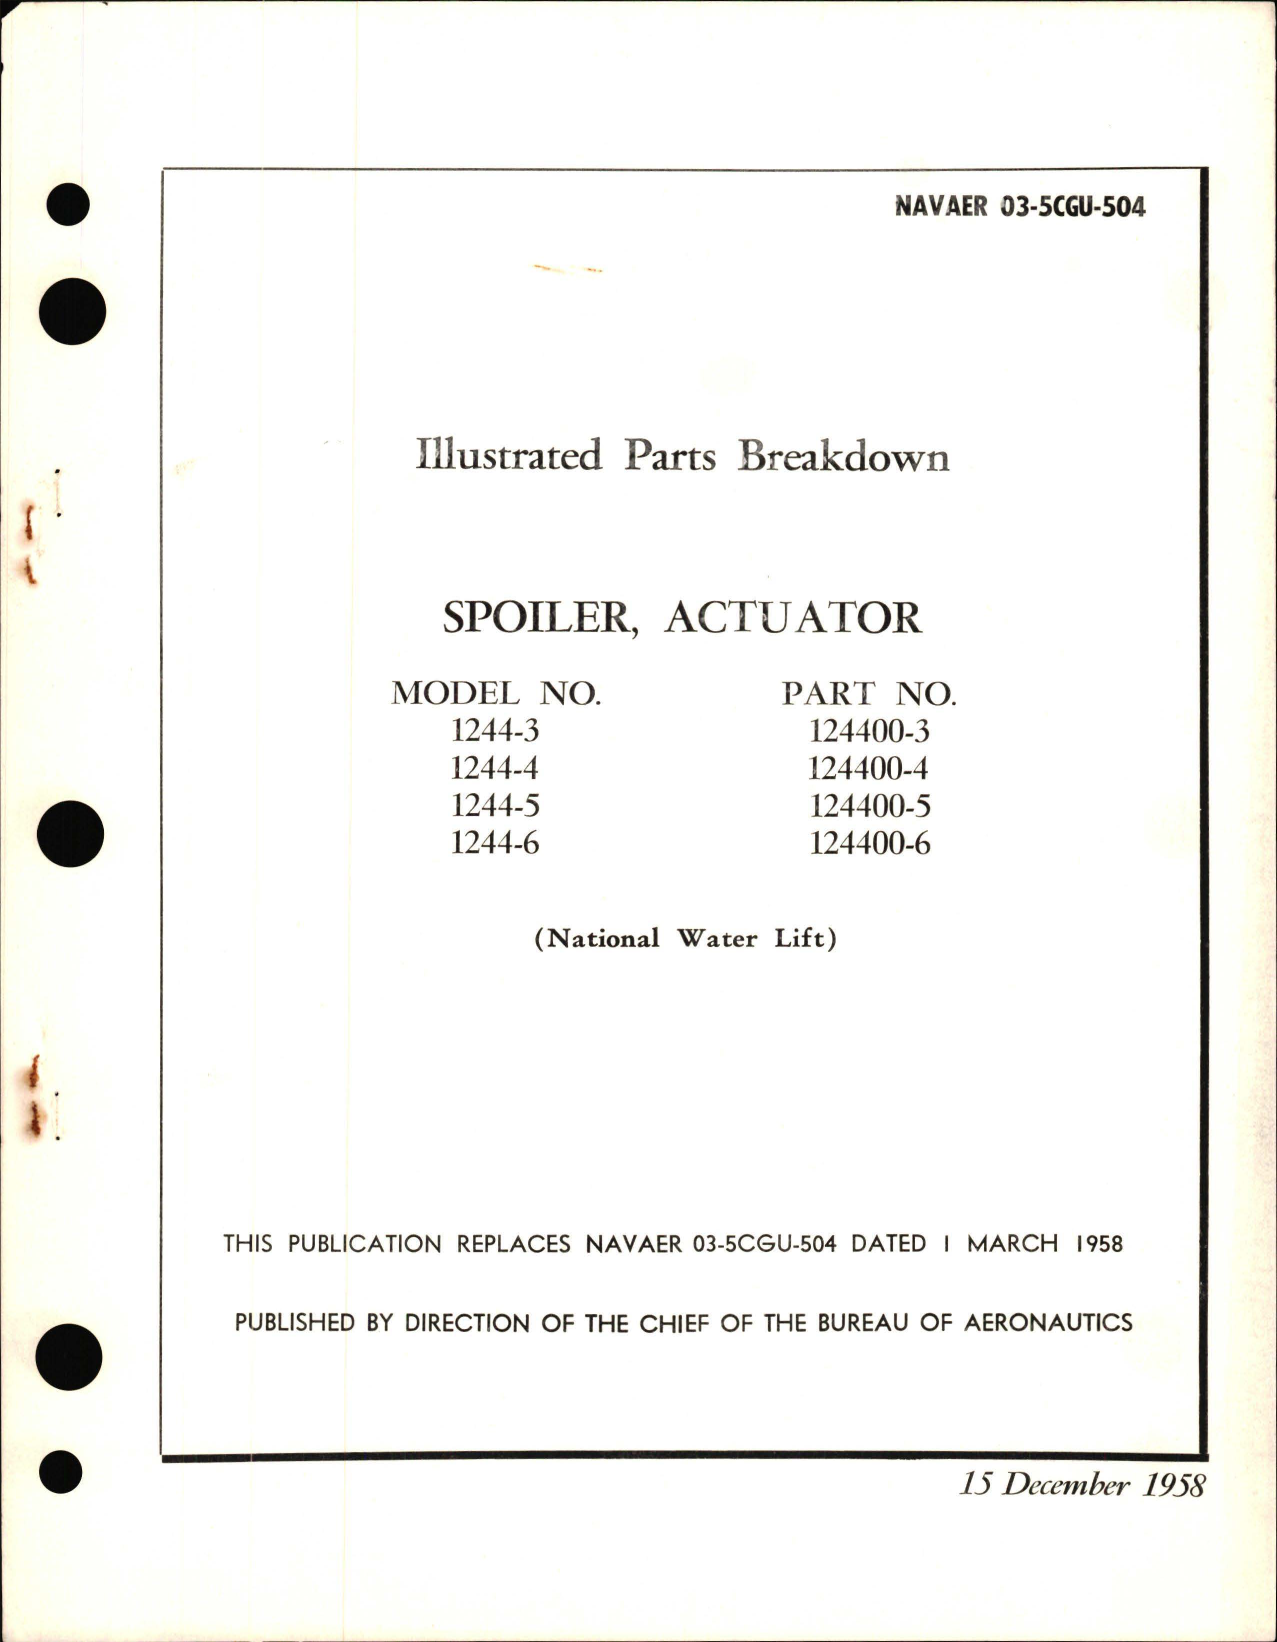 Sample page 1 from AirCorps Library document: Illustrated Parts Breakdown for Spoiler, Actuator - Part 1244 Series 